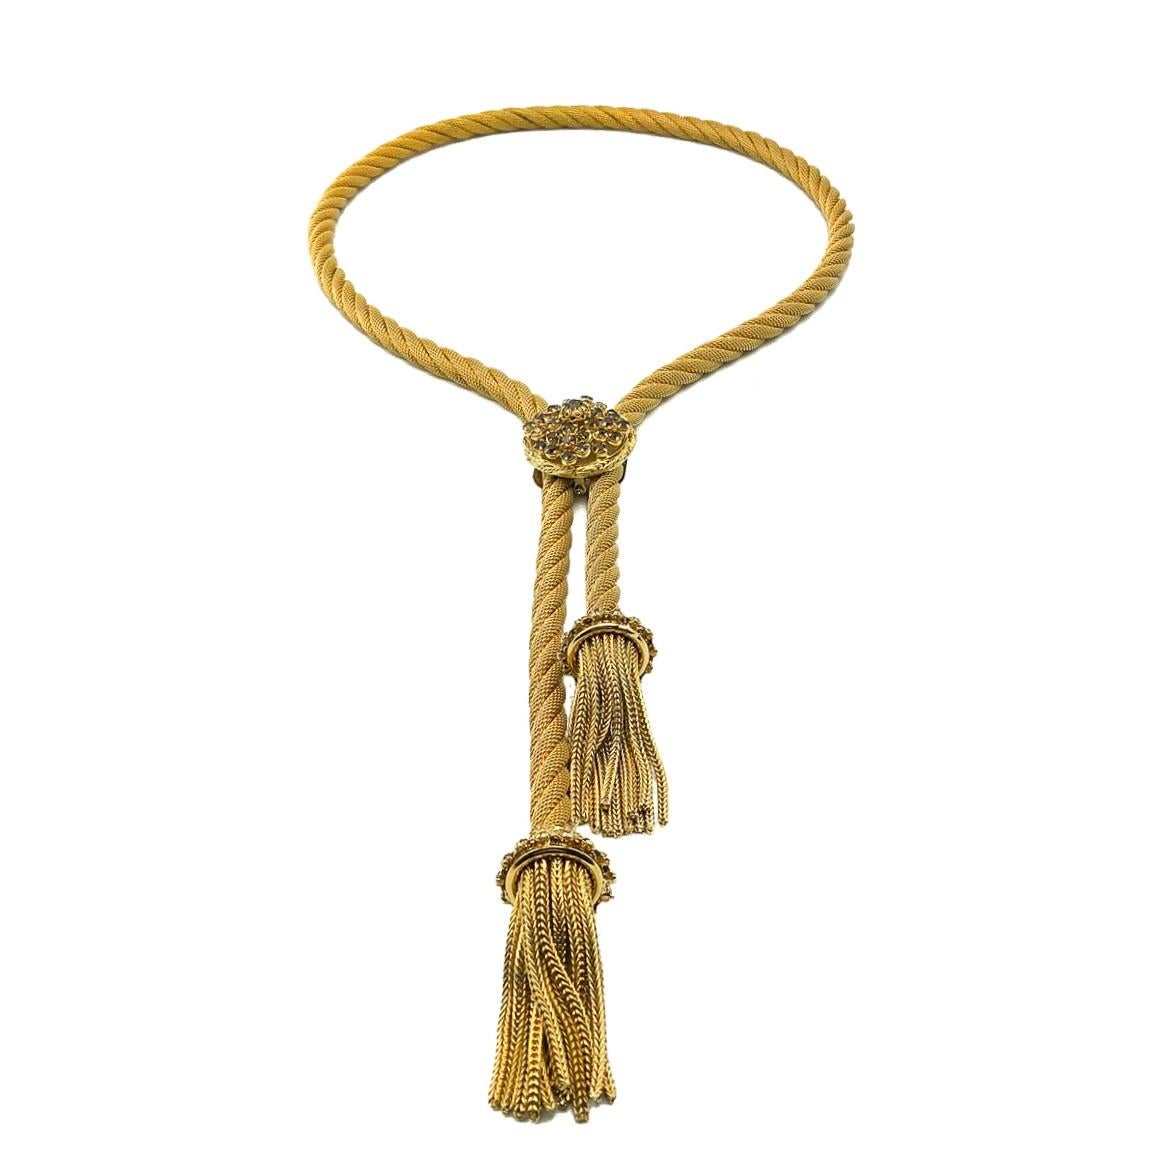 A truly stunning Vintage Lariat Tassel Necklace. Crafted in gold plated metal mesh with claw set amber crystals in filigree settings on the clasp and ends. Finished with beautiful, luxurious, chain style tassels. Super high quality. In very good